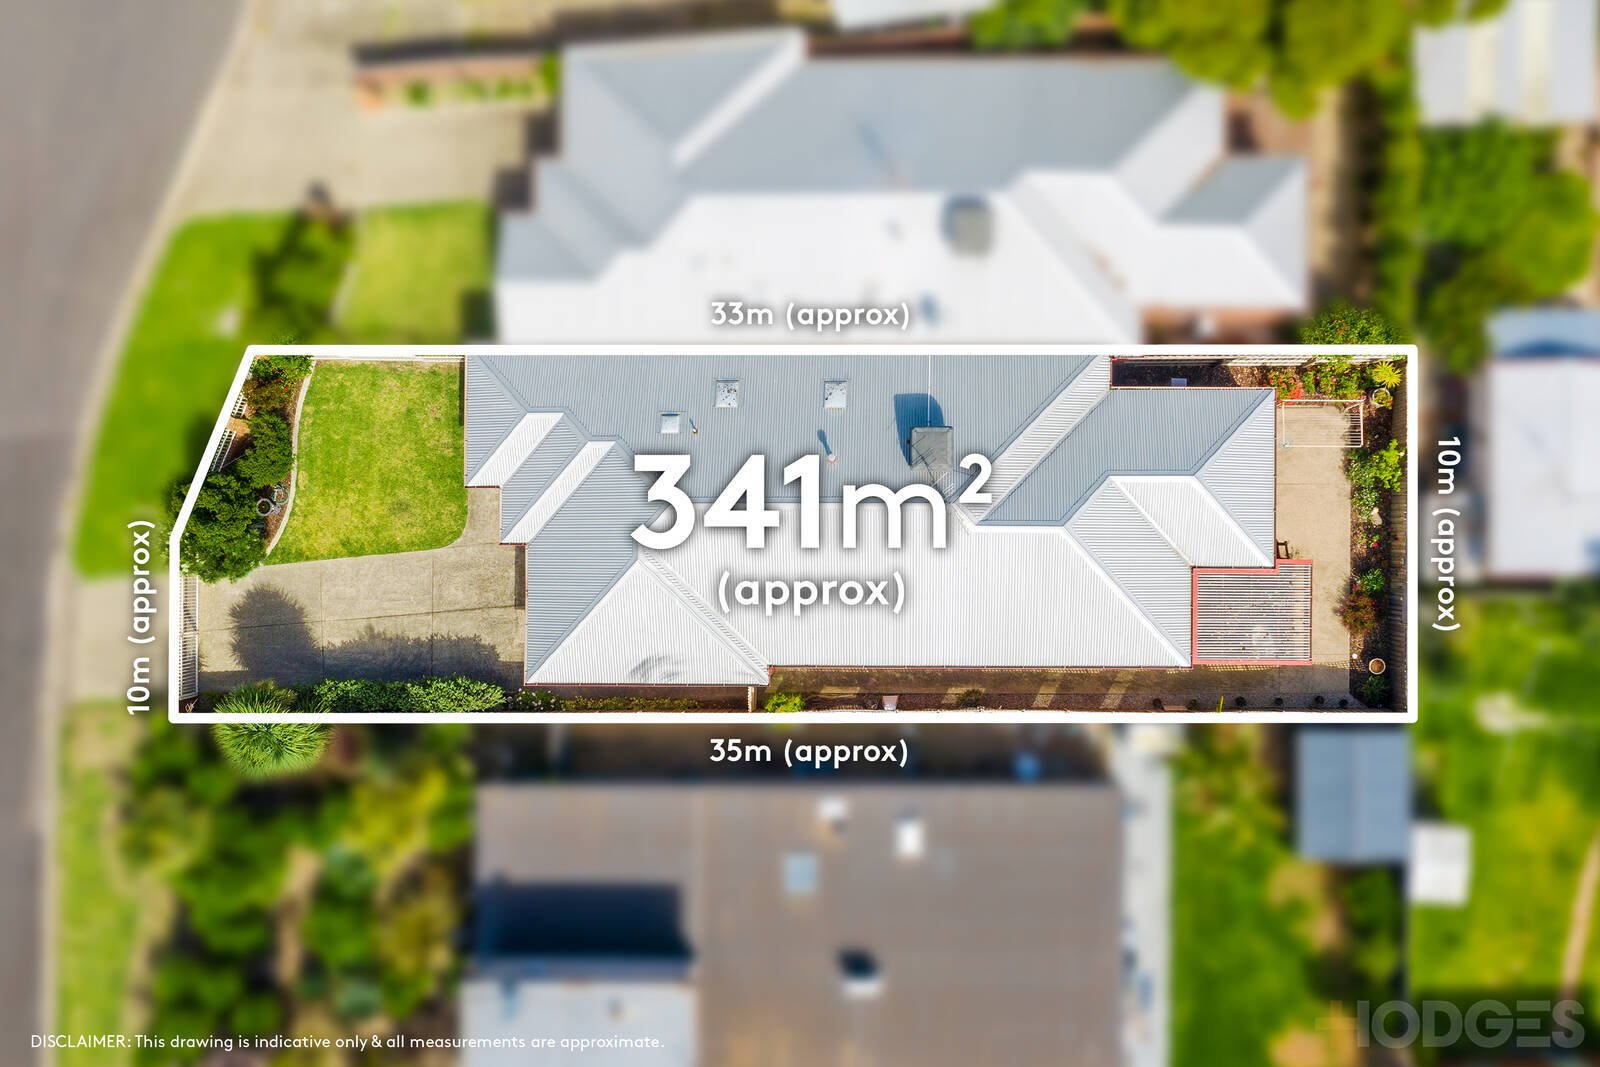 1 / 8 Flower Court Grovedale